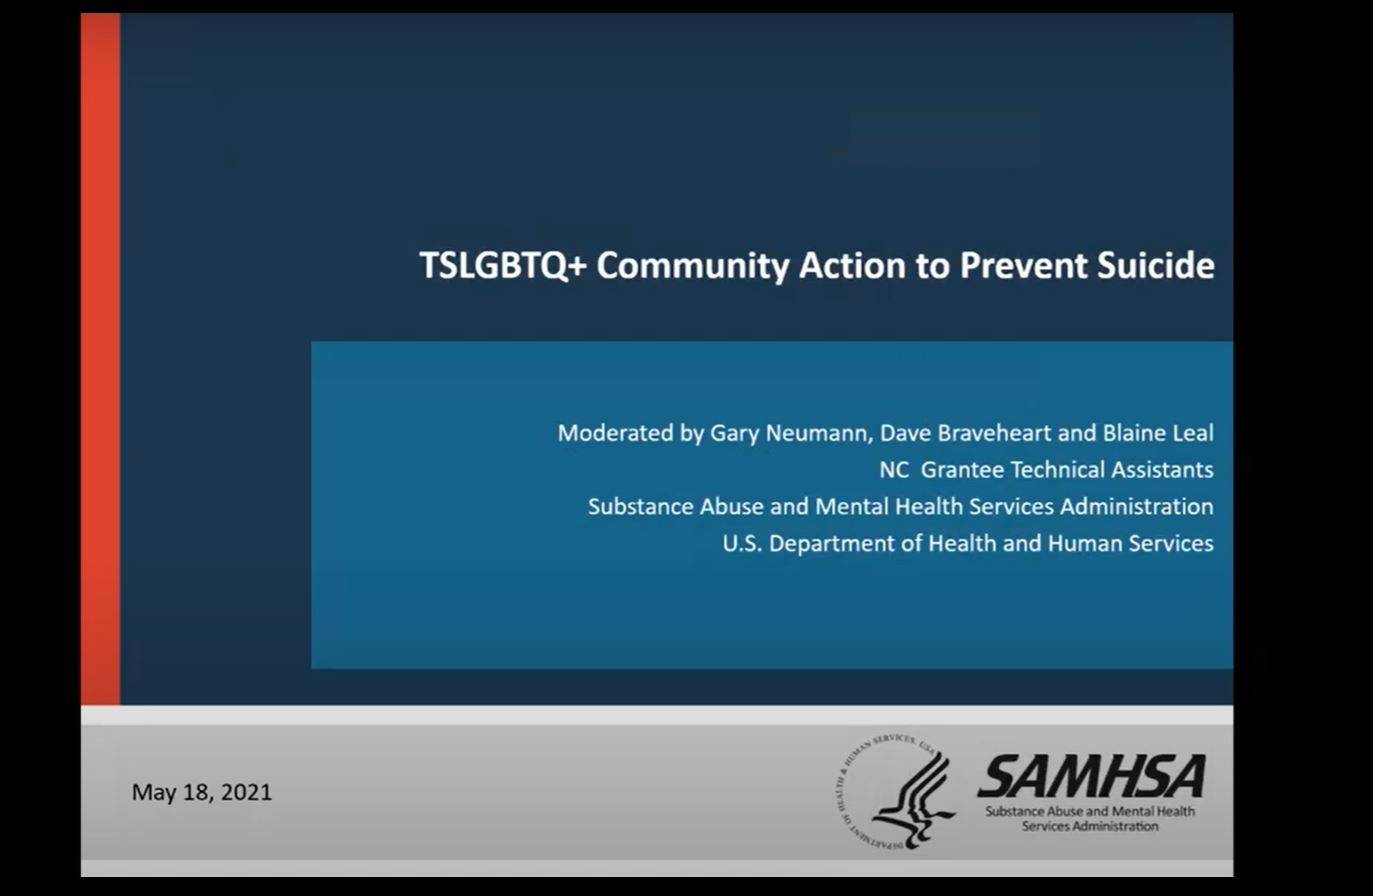 TSLGBTQ+ Community Action to Prevent Suicide